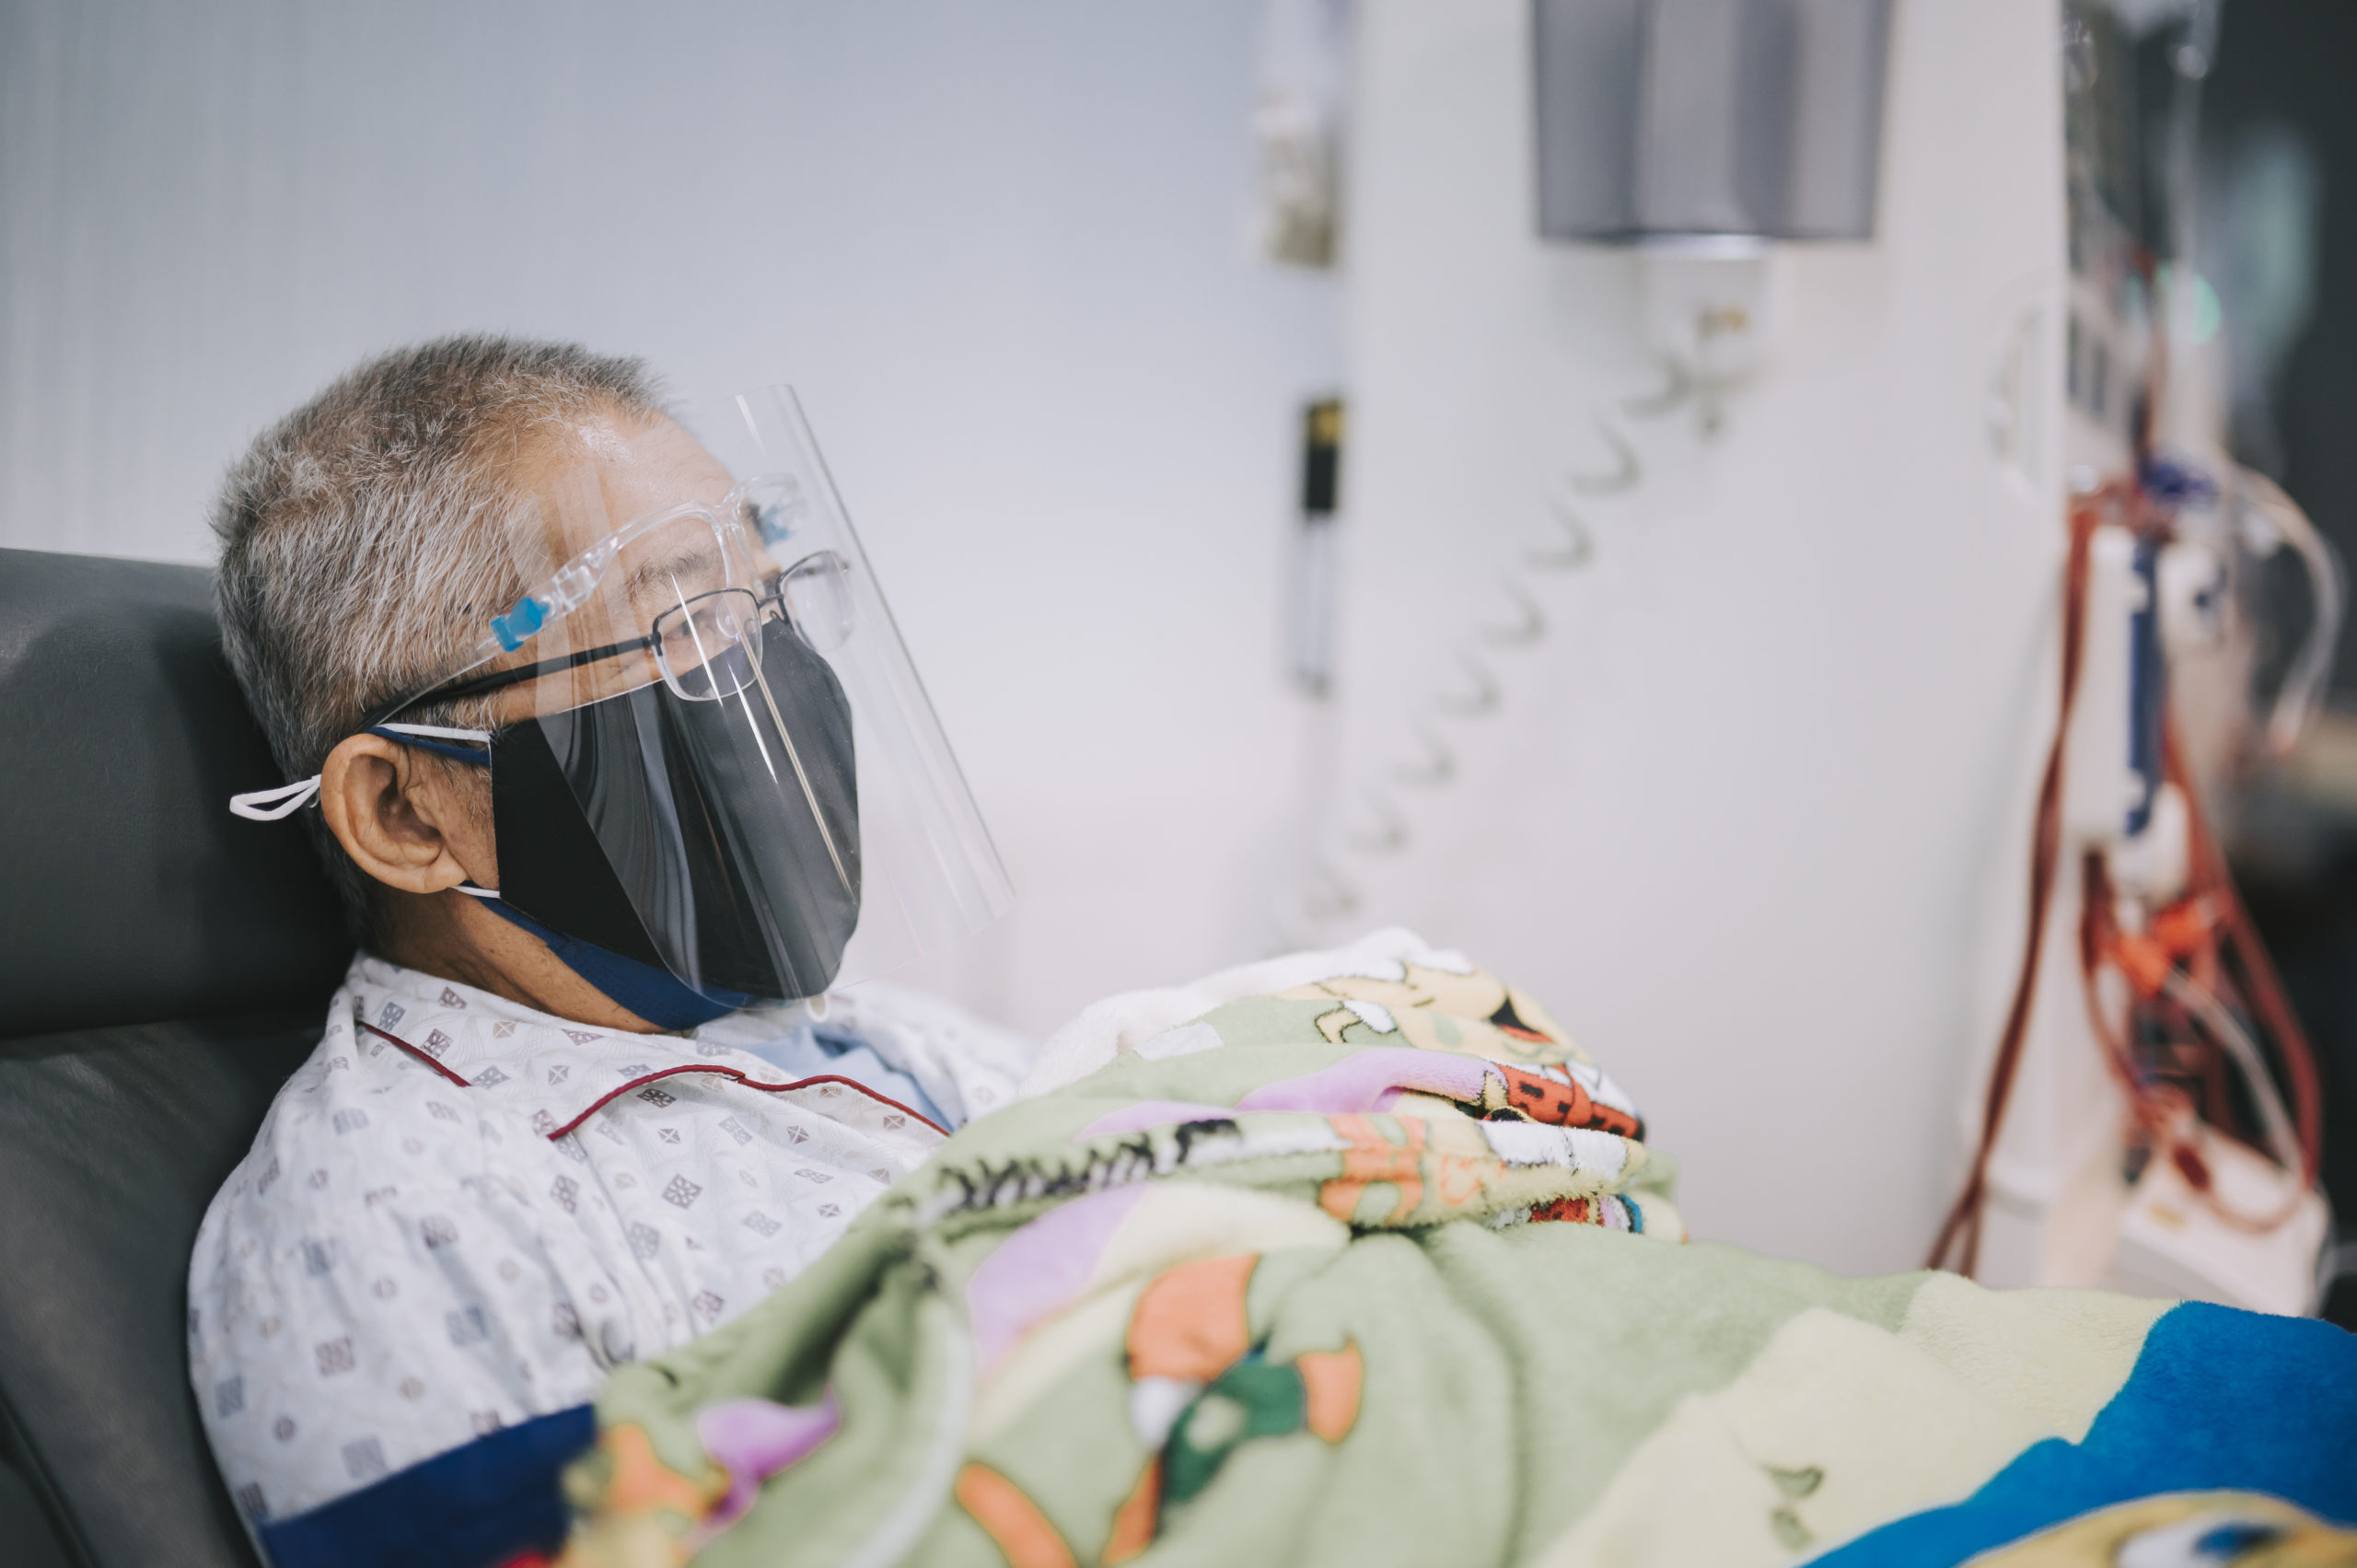 Benefit of dialysis unclear for older people with chronic kidney disease and heart failure